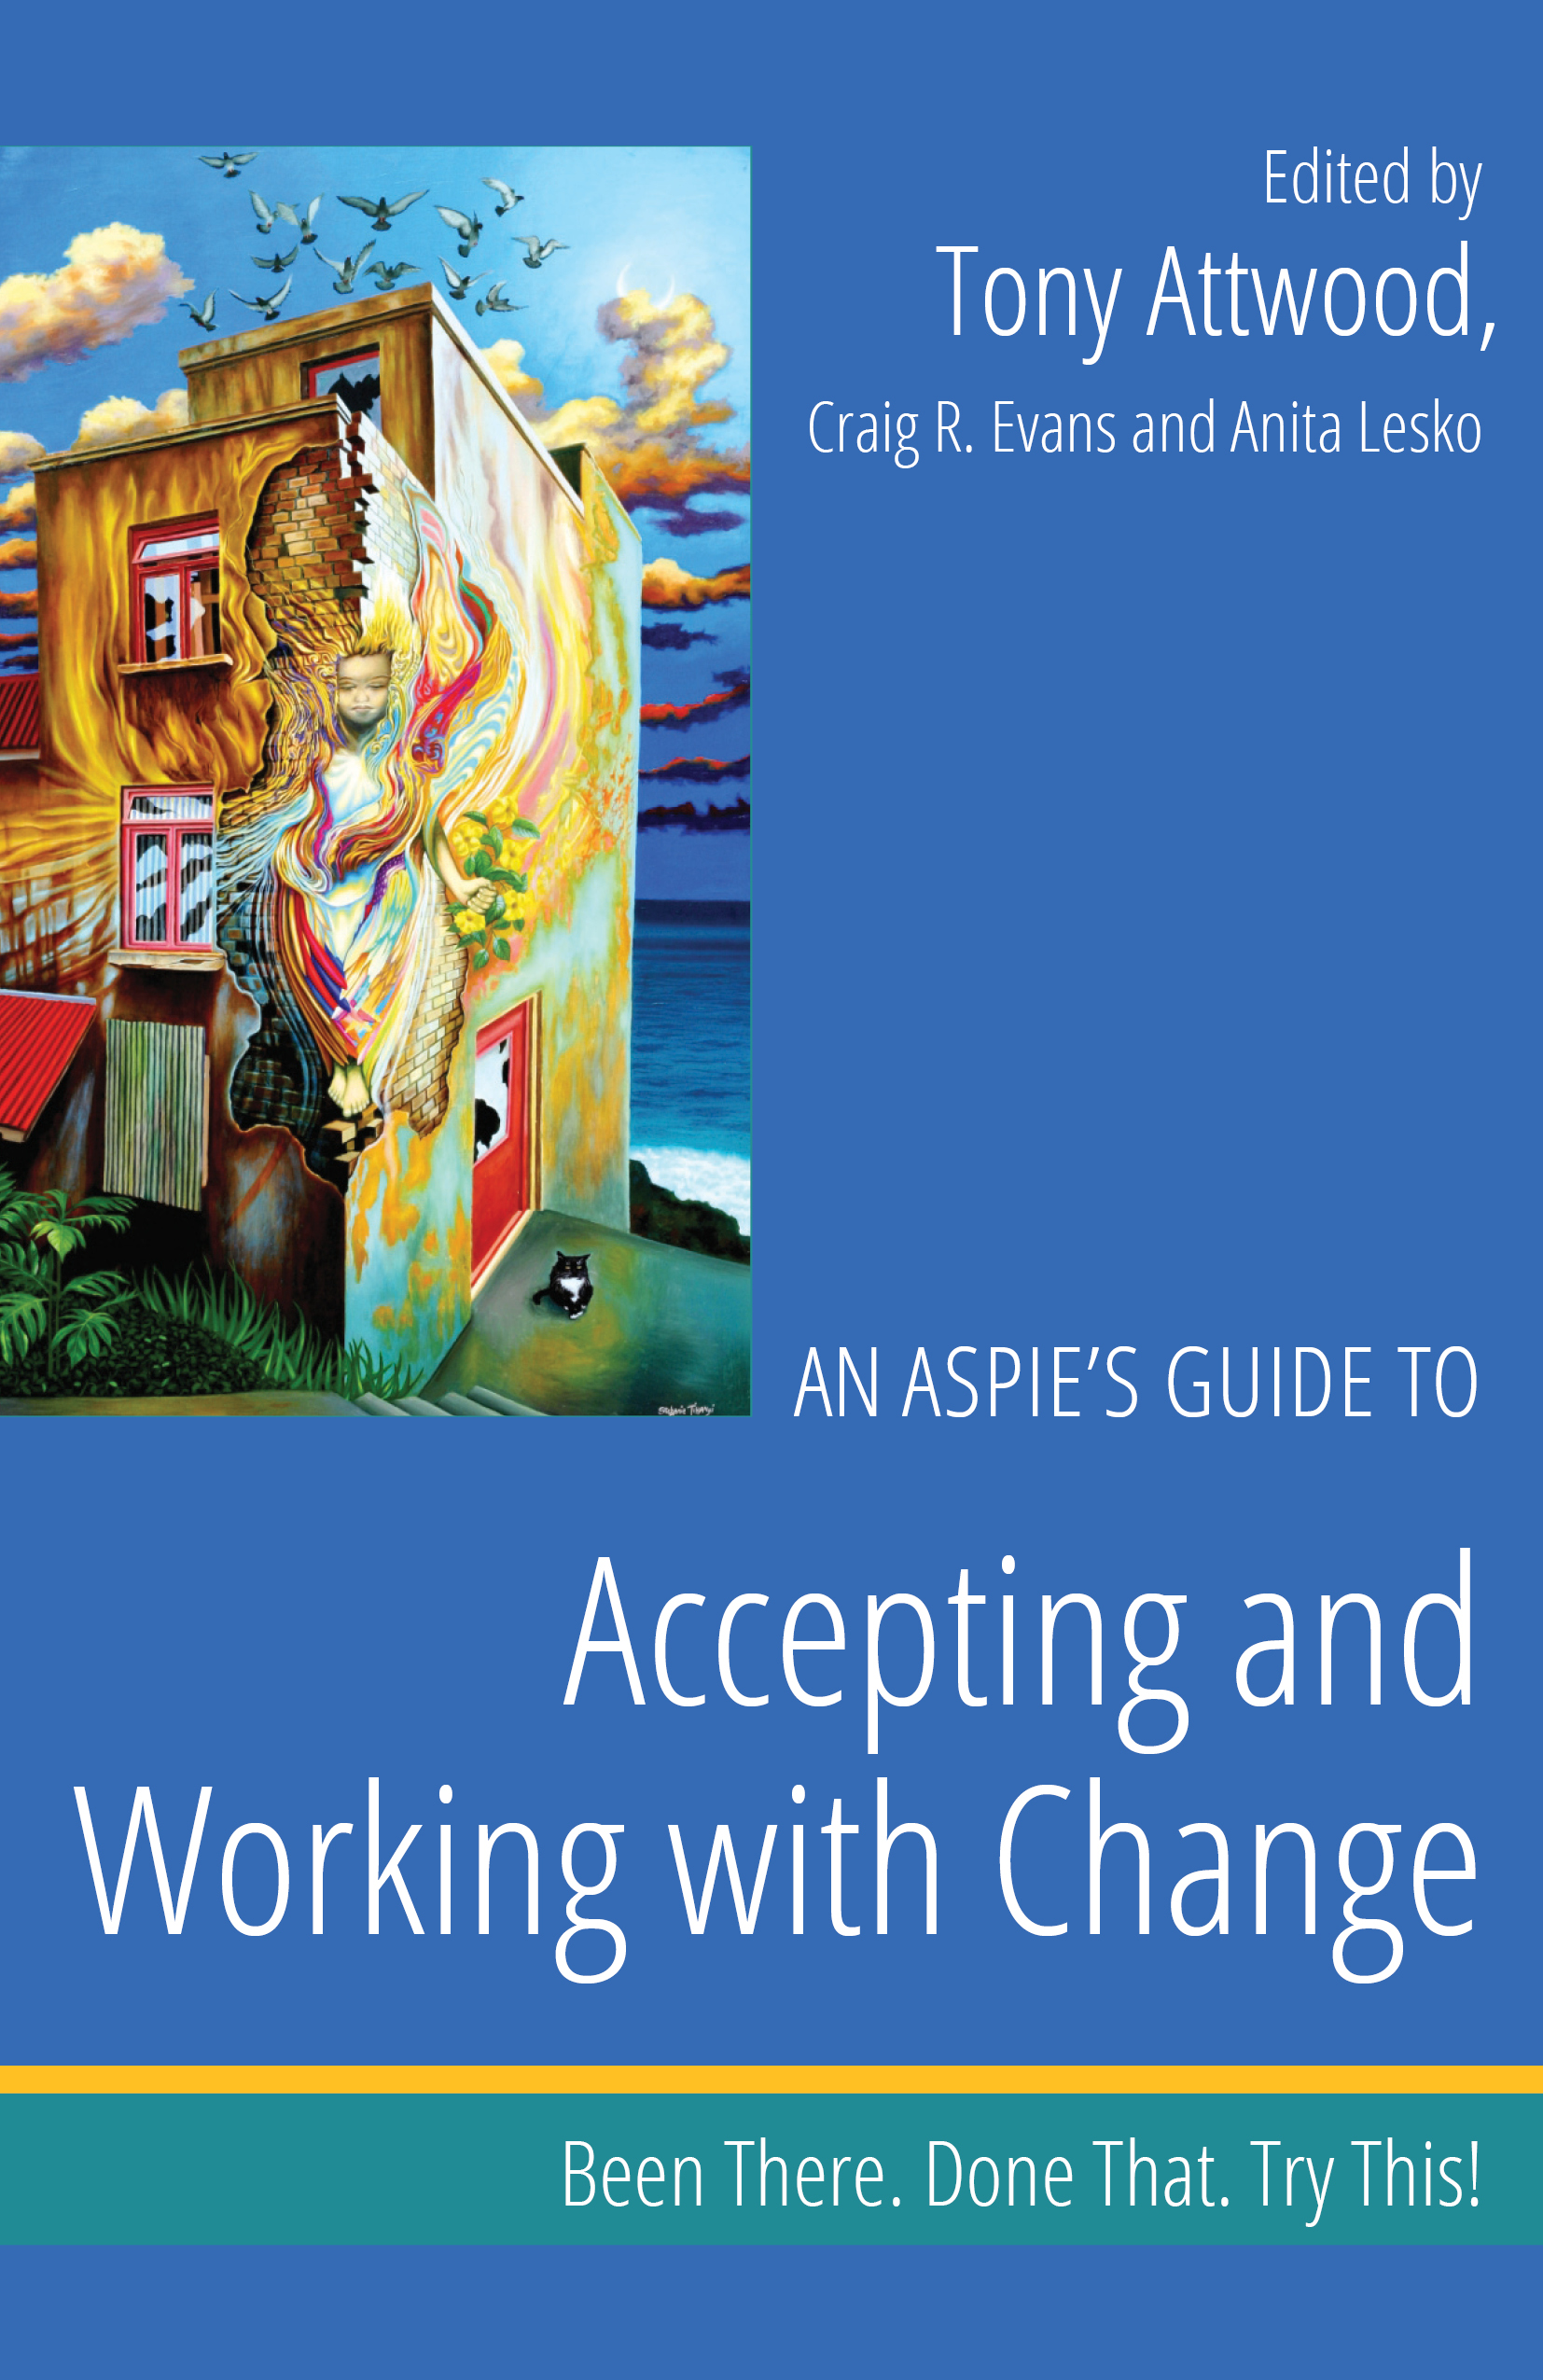 An Aspie's Guide to Accepting and Working with Change